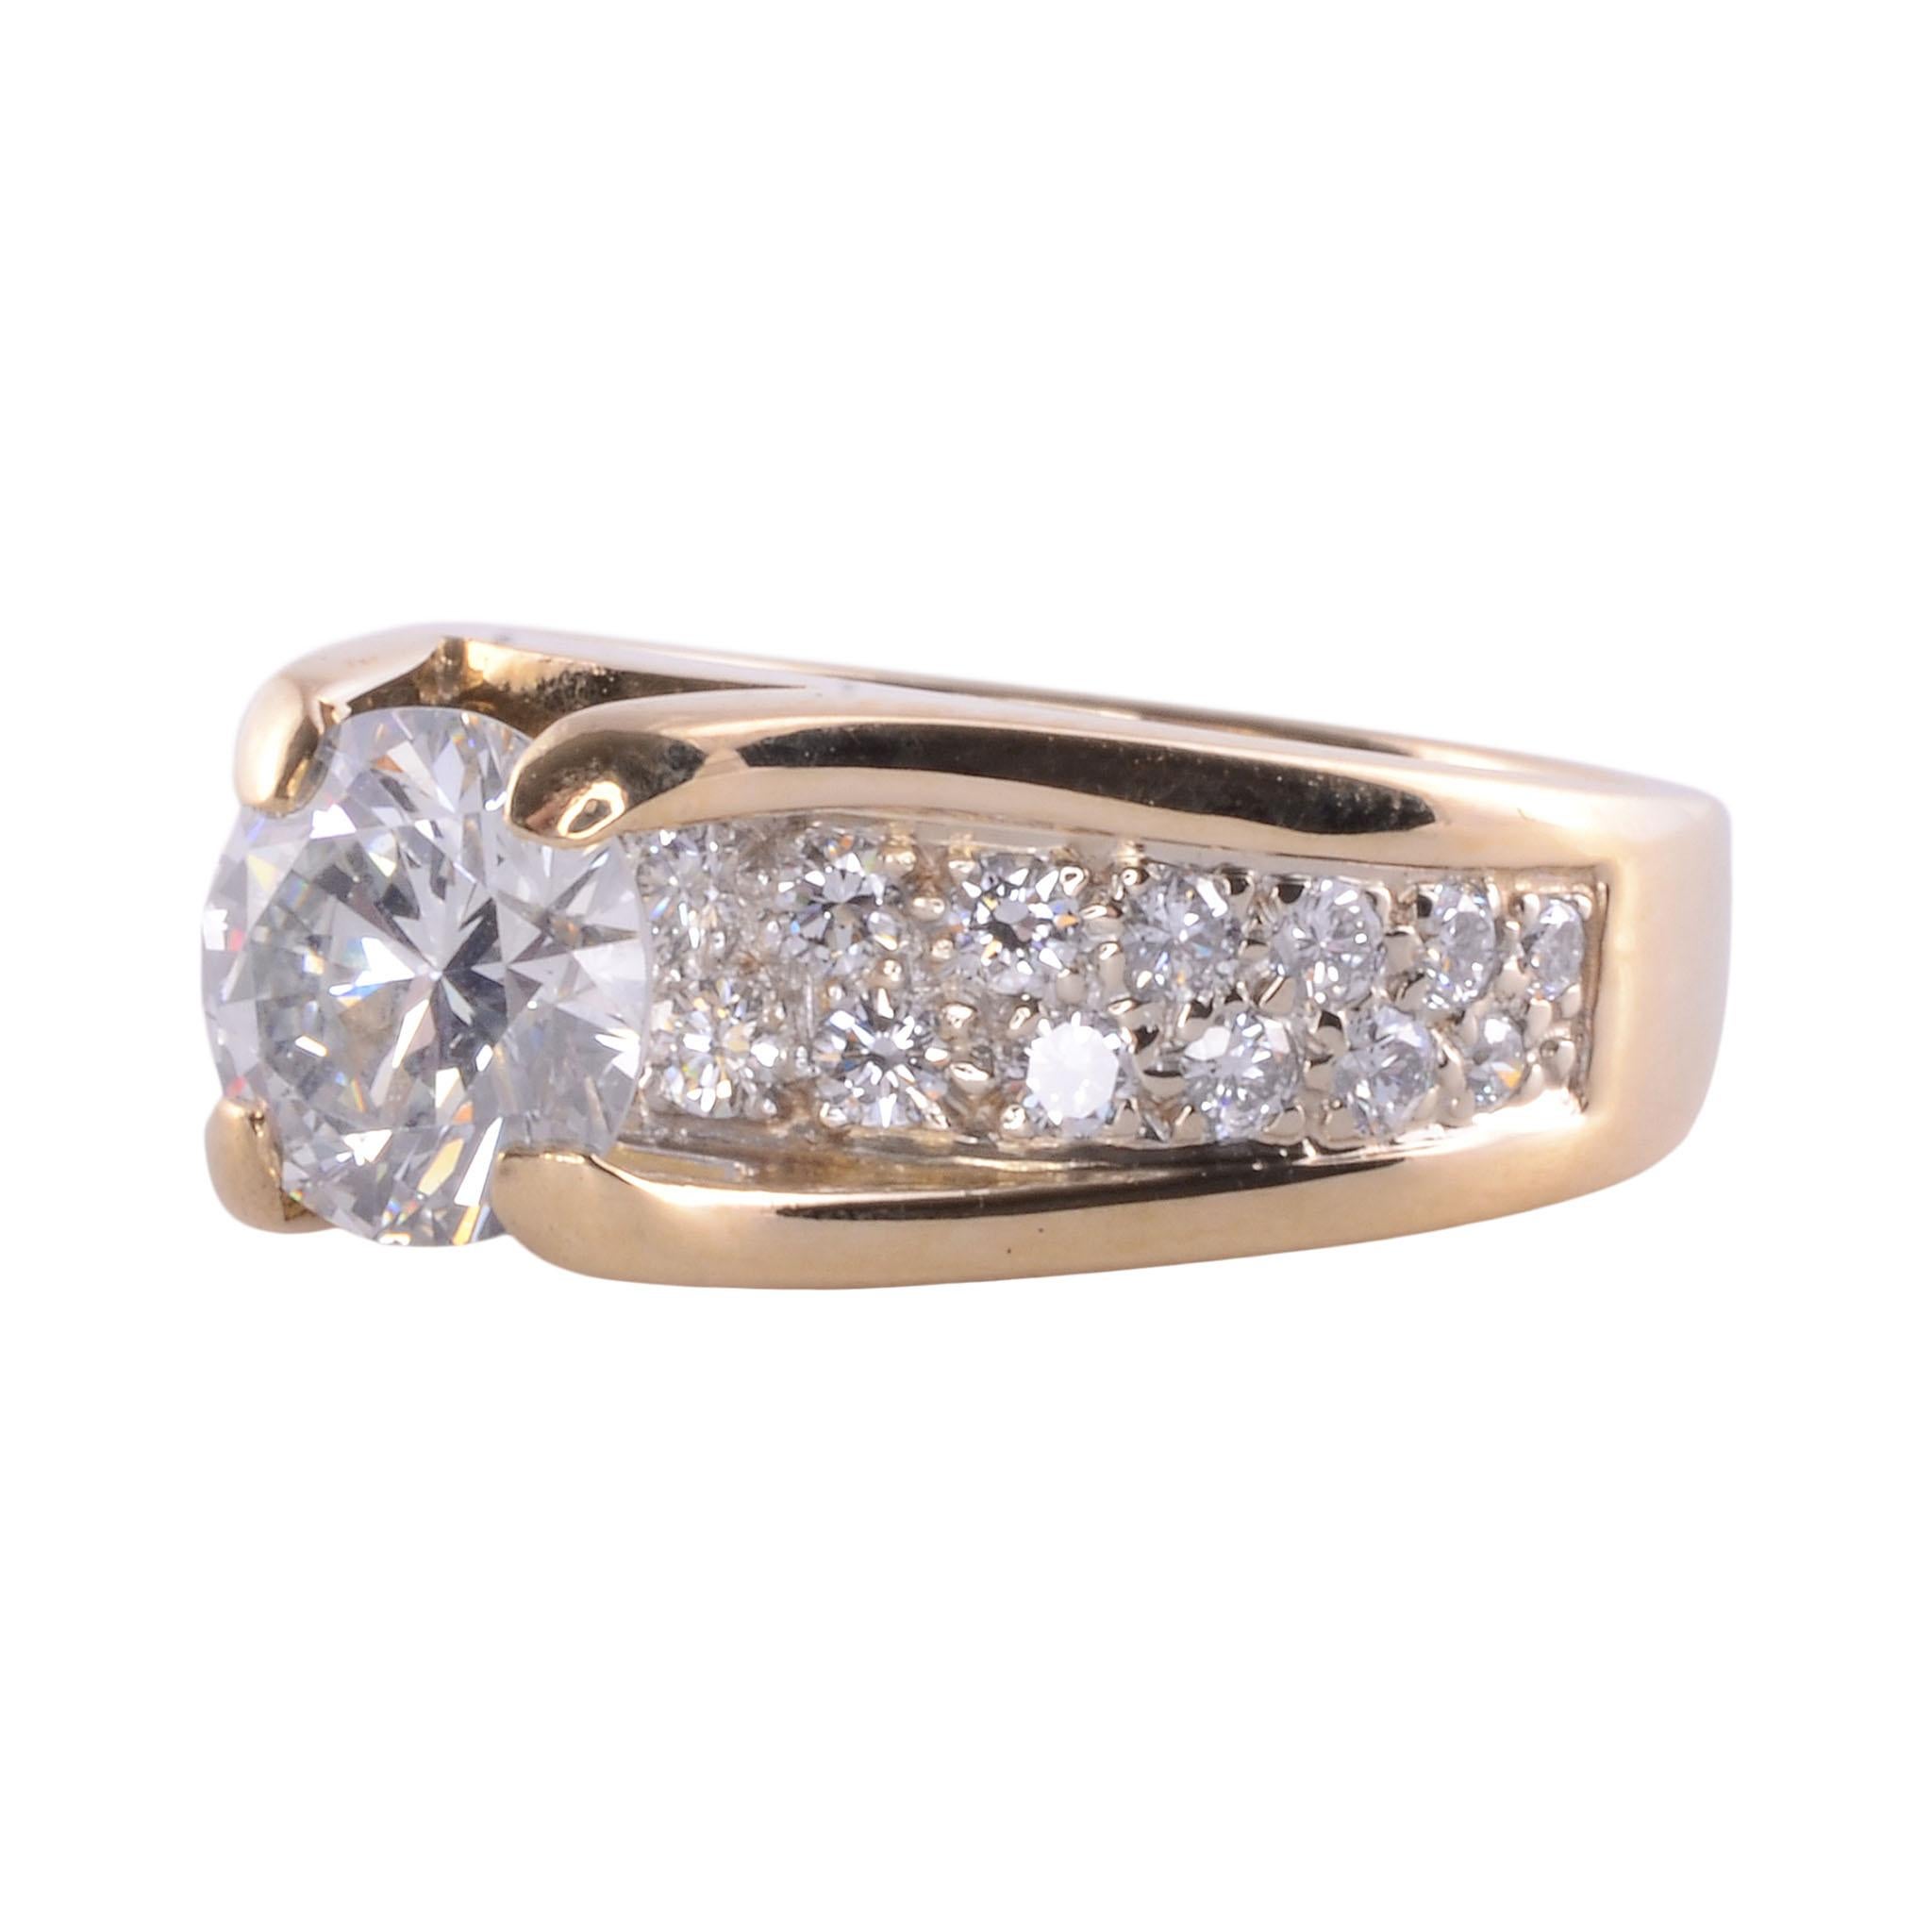 Estate 1.52 carat VS2 center diamond ring. This two tone 14 karat gold ring features a 1.52 carat center diamond with VS2 clarity and G color. There are also 26 full cut diamonds at .50 carat total weight. The pave set accent diamonds have VS1-2